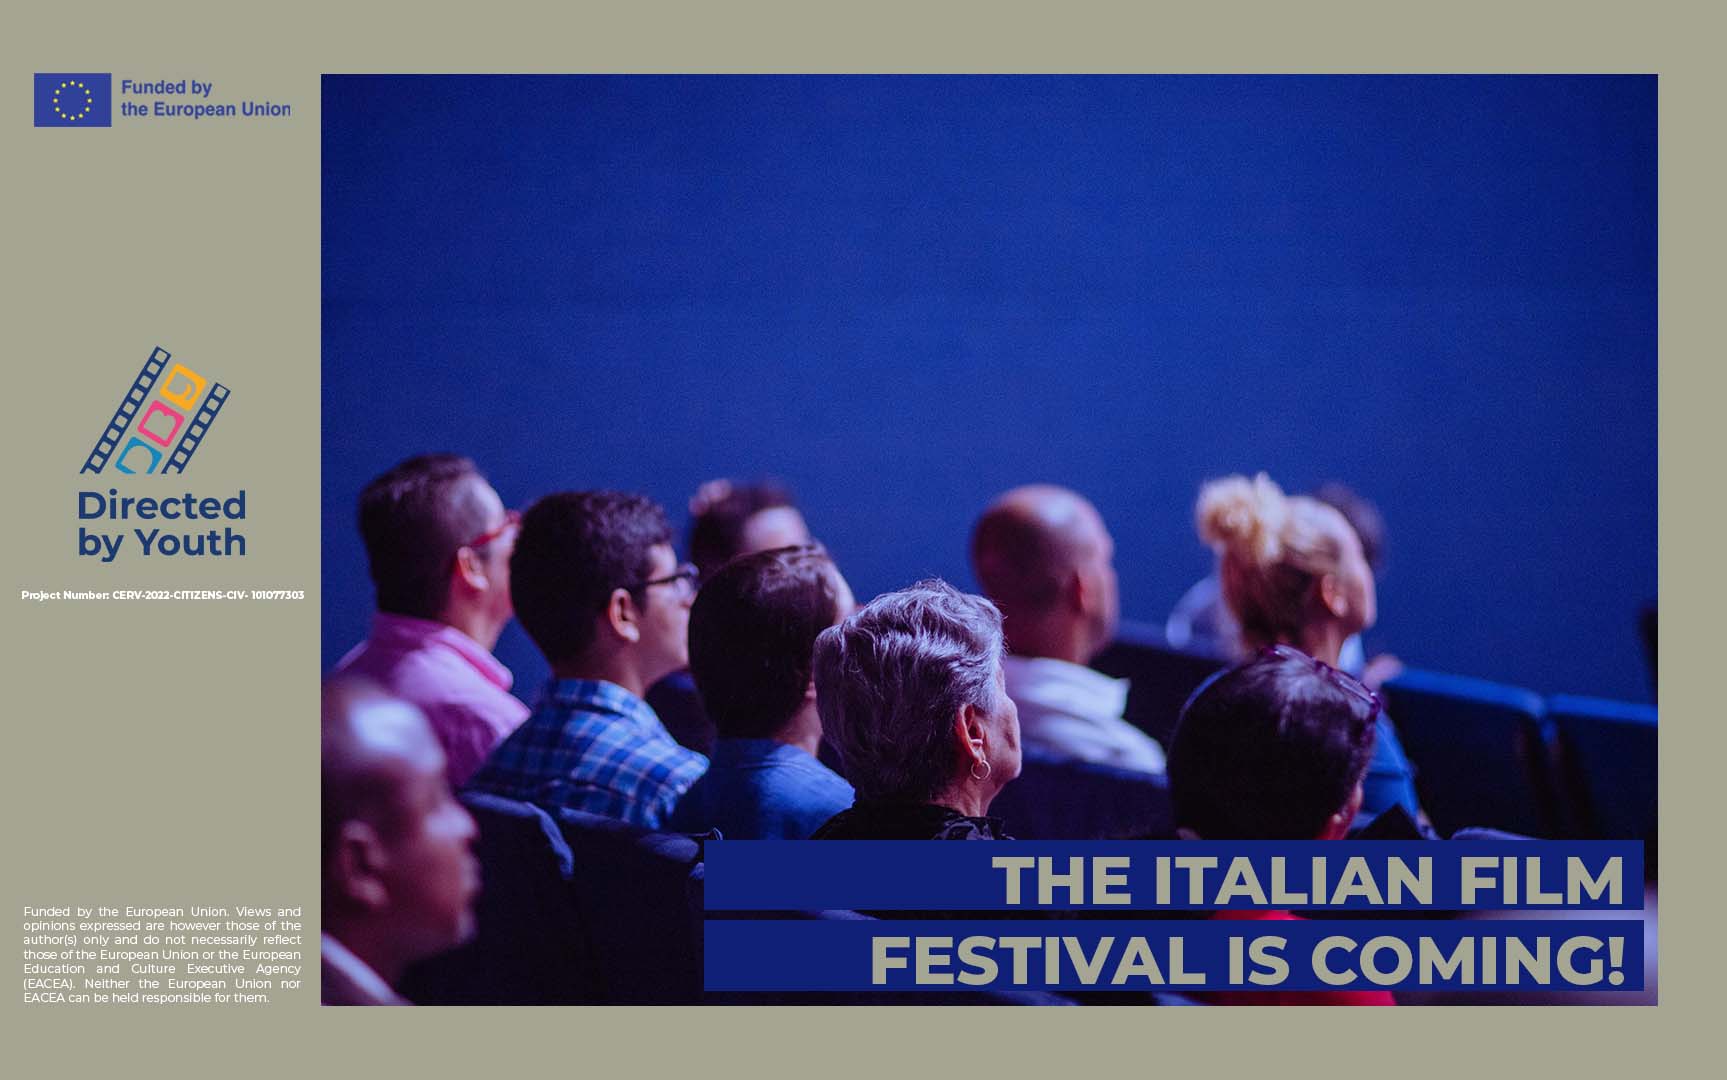 D.B.Y. The Italian film festival is coming! CEIPES